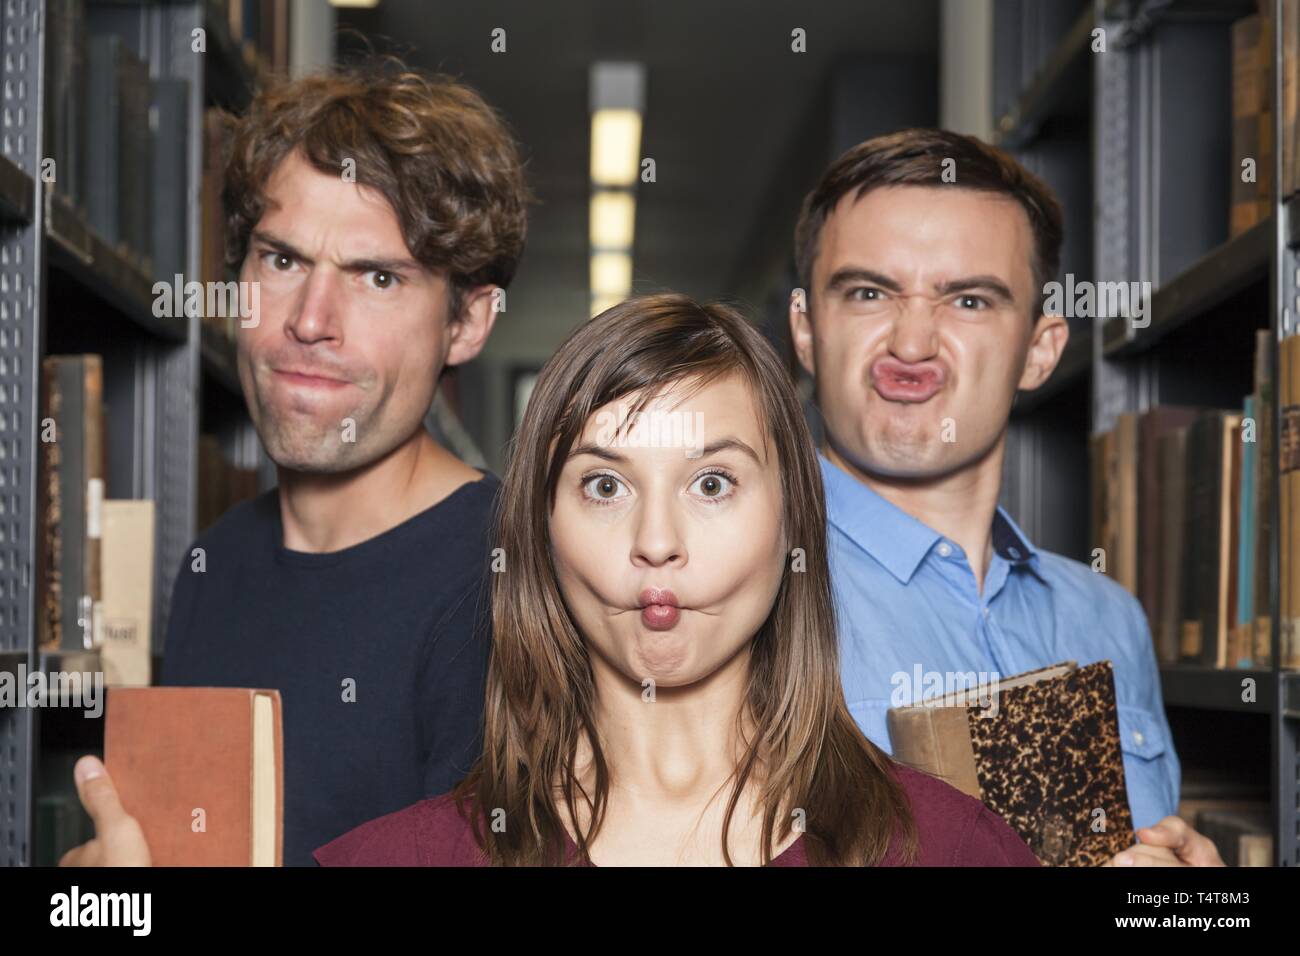 Three students in library pulling grimace Stock Photo